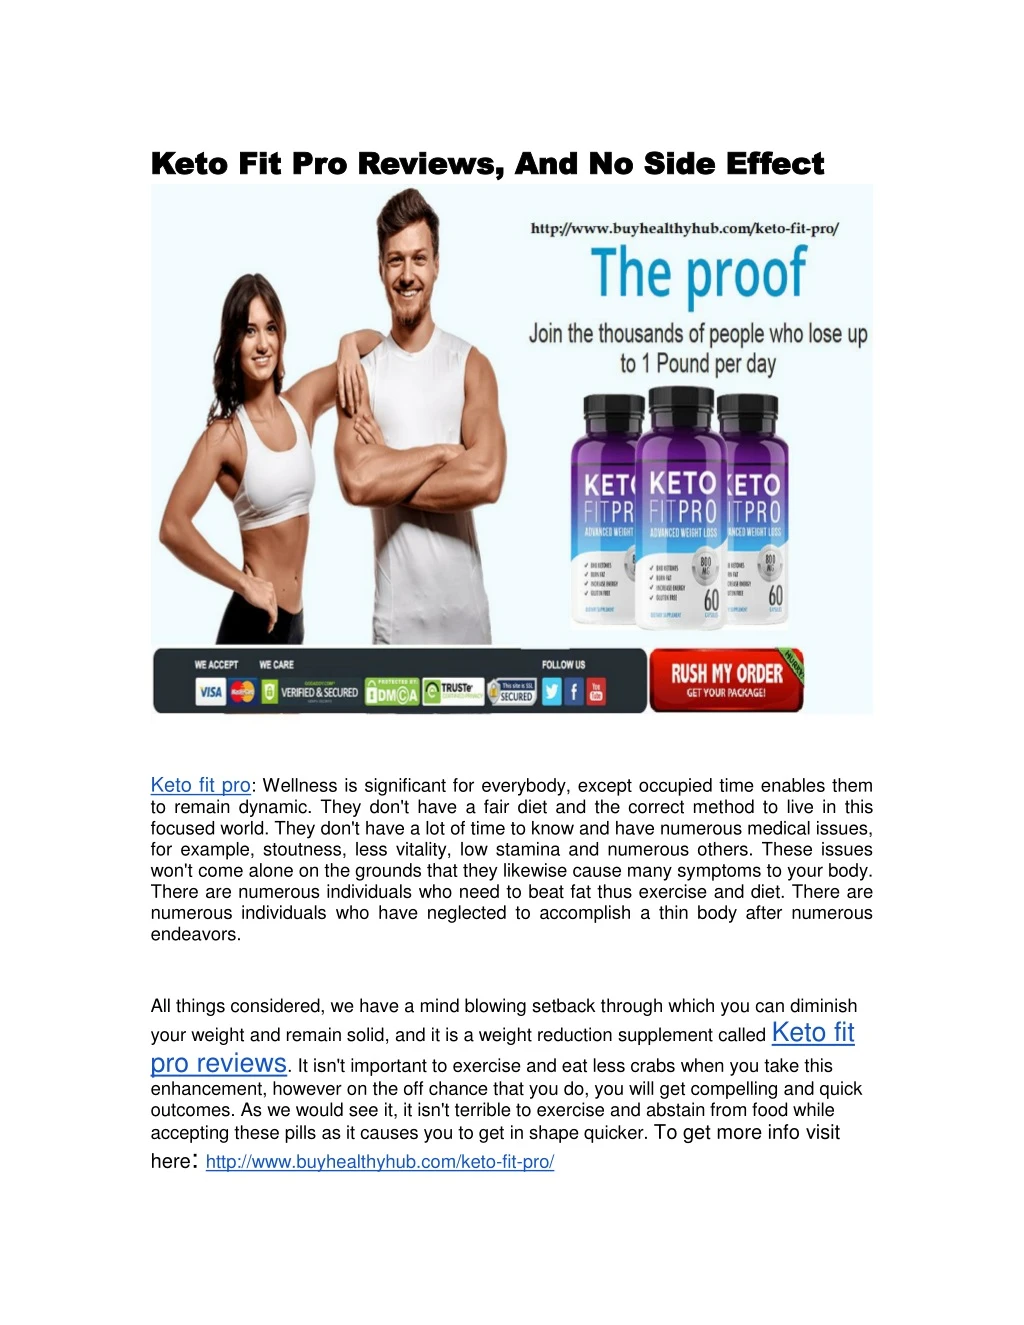 keto fit pro reviews and no side effect keto